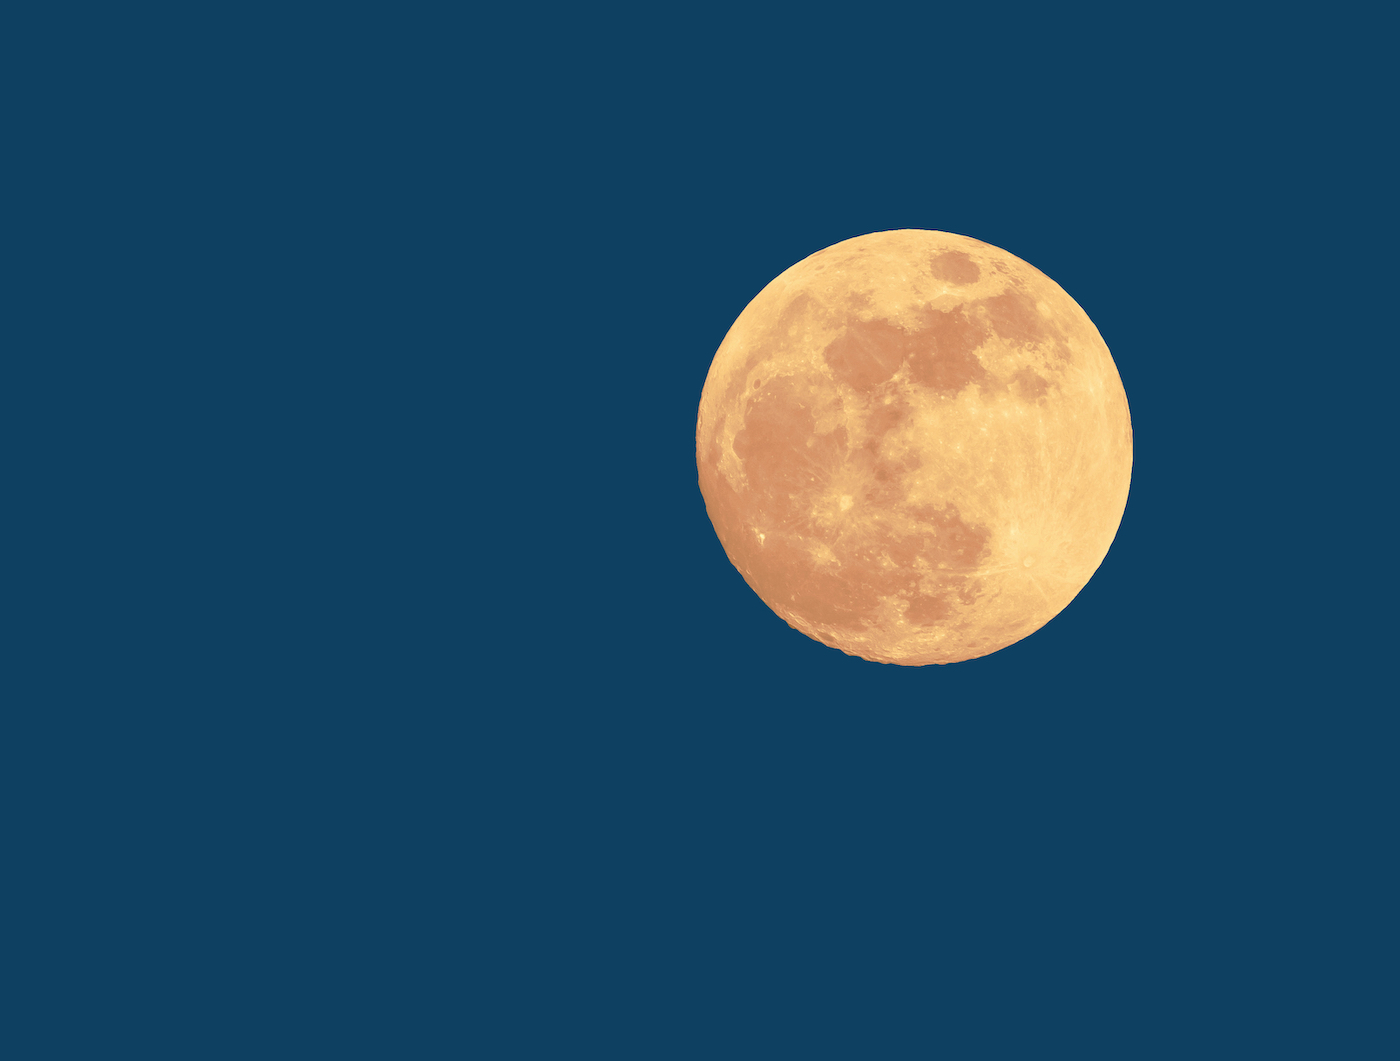 the full moon on a night-blue background